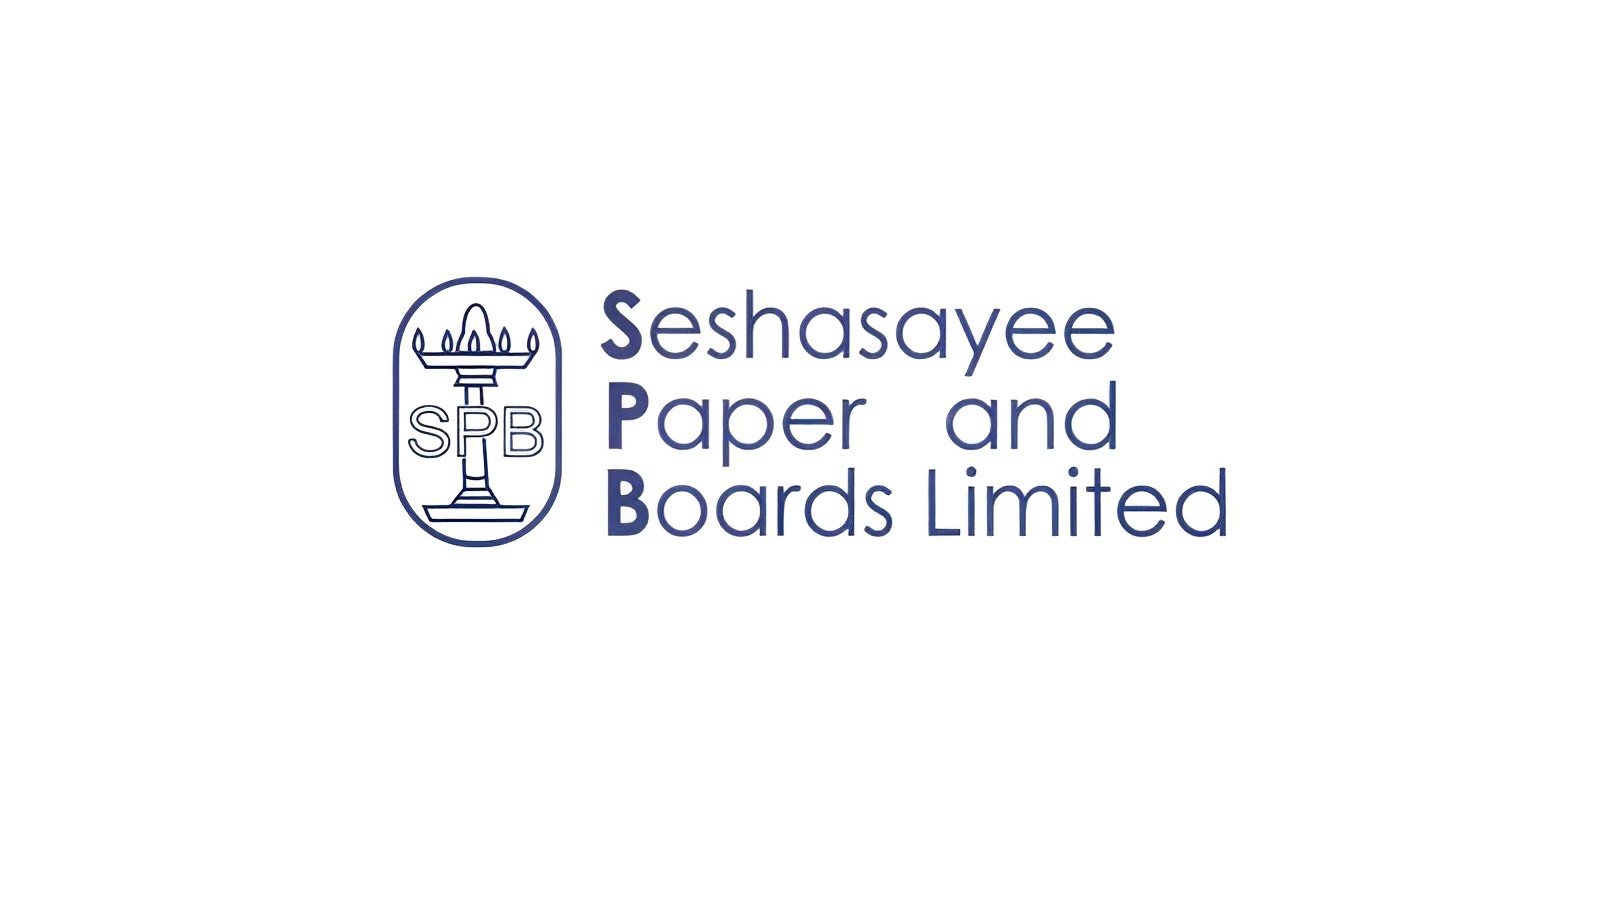 Seshasayee Paper and Boards Ltd Q3FY23 PAT up at ₹111.57 Cr